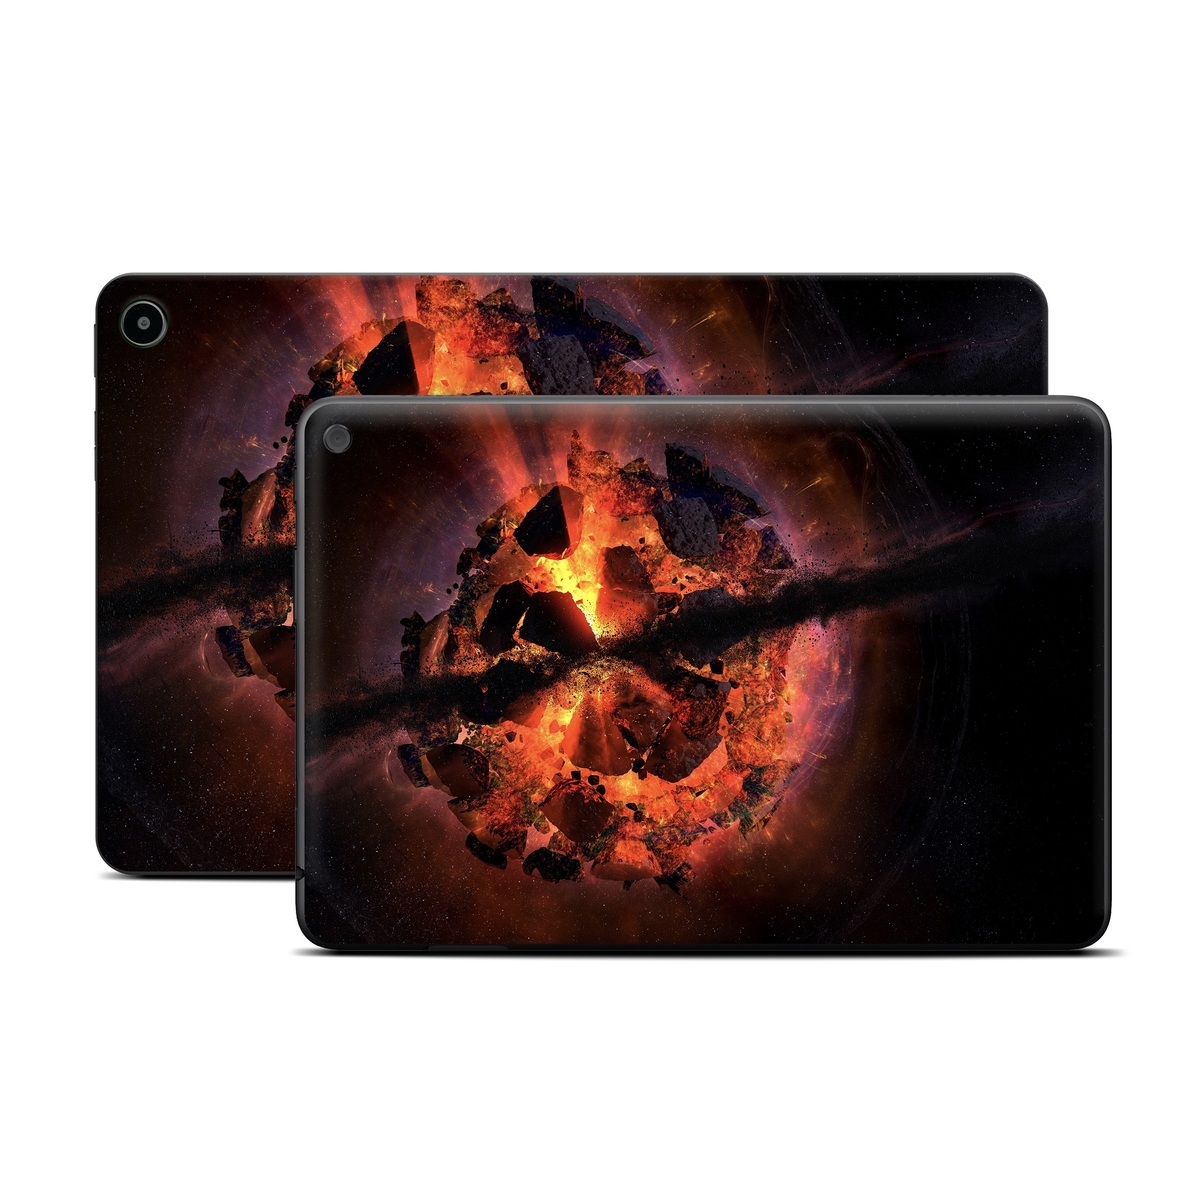 Amazon Fire Tablet Series Skin Skin design of Flame, Heat, Fire, Space, Atmosphere, Charcoal, Explosion, Geological phenomenon, Ash, Graphics, with black, red colors